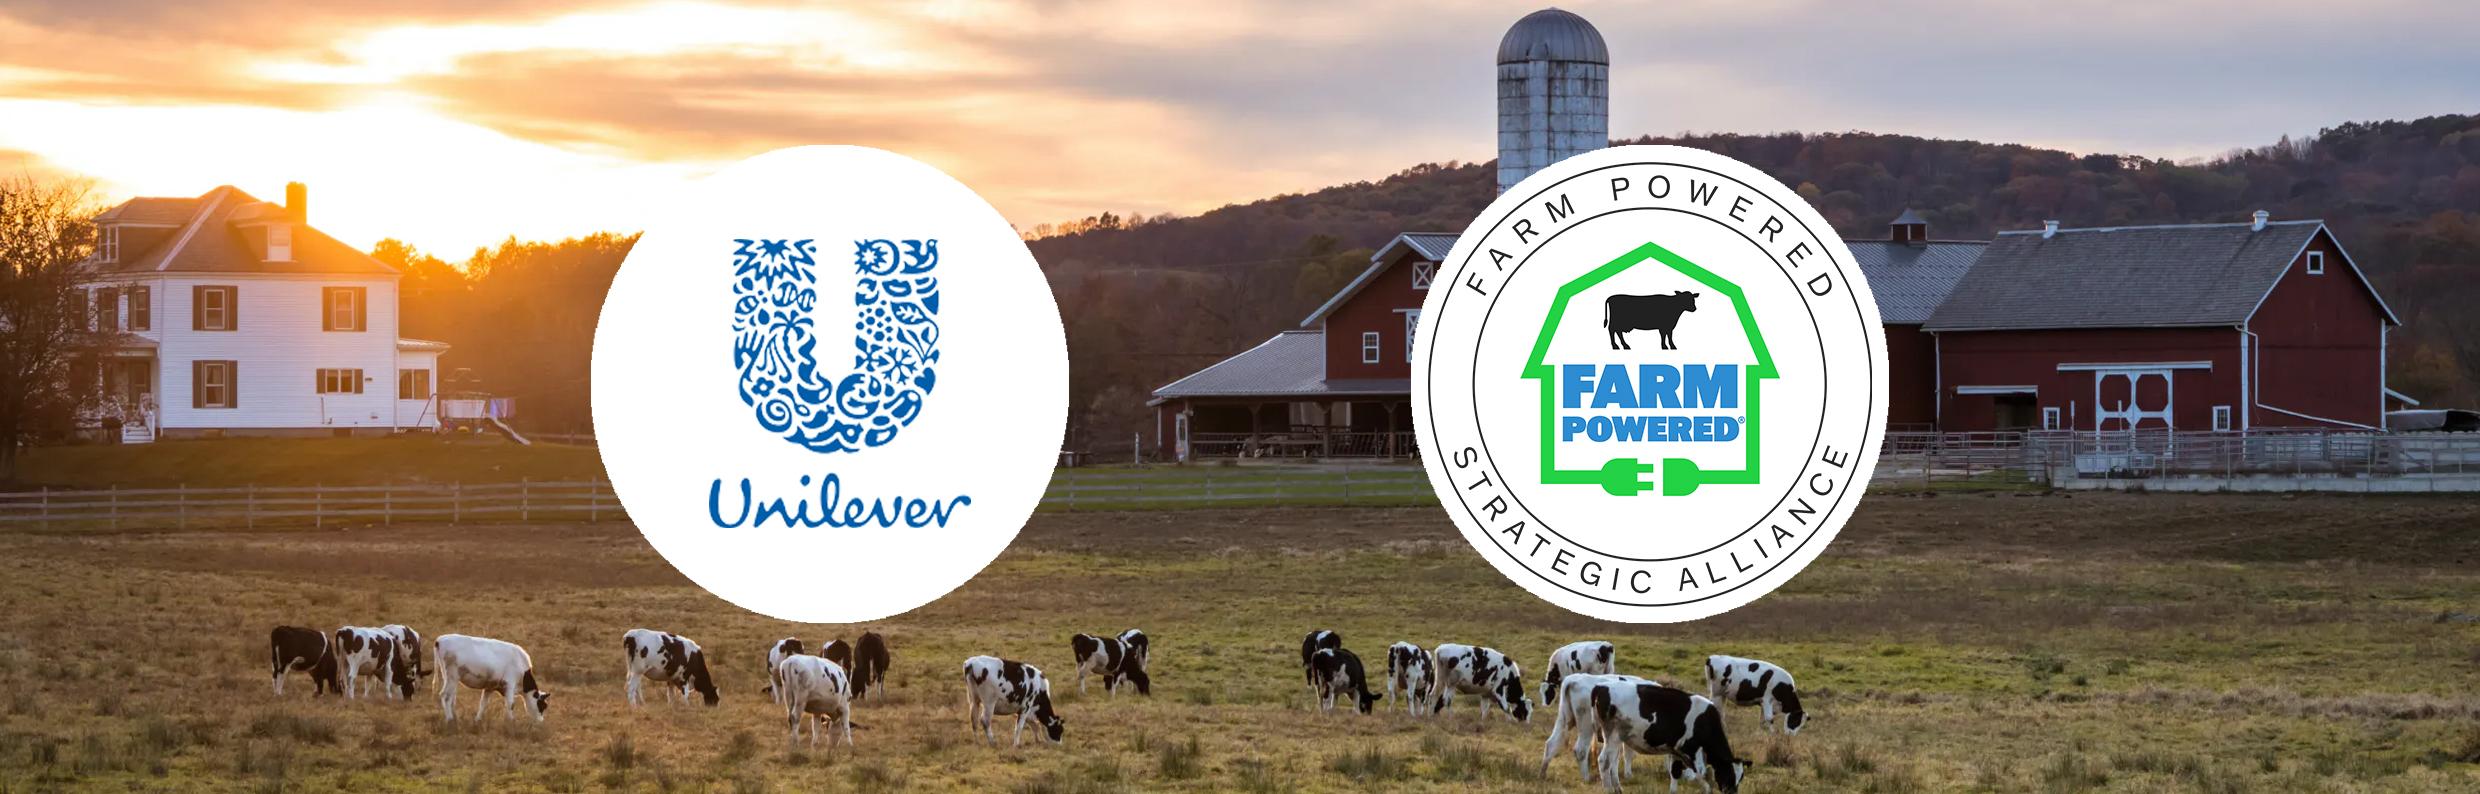 Logos of Unilever and Farm Powered Strategic Alliance, with a background image of a farm using anaerobic digestion